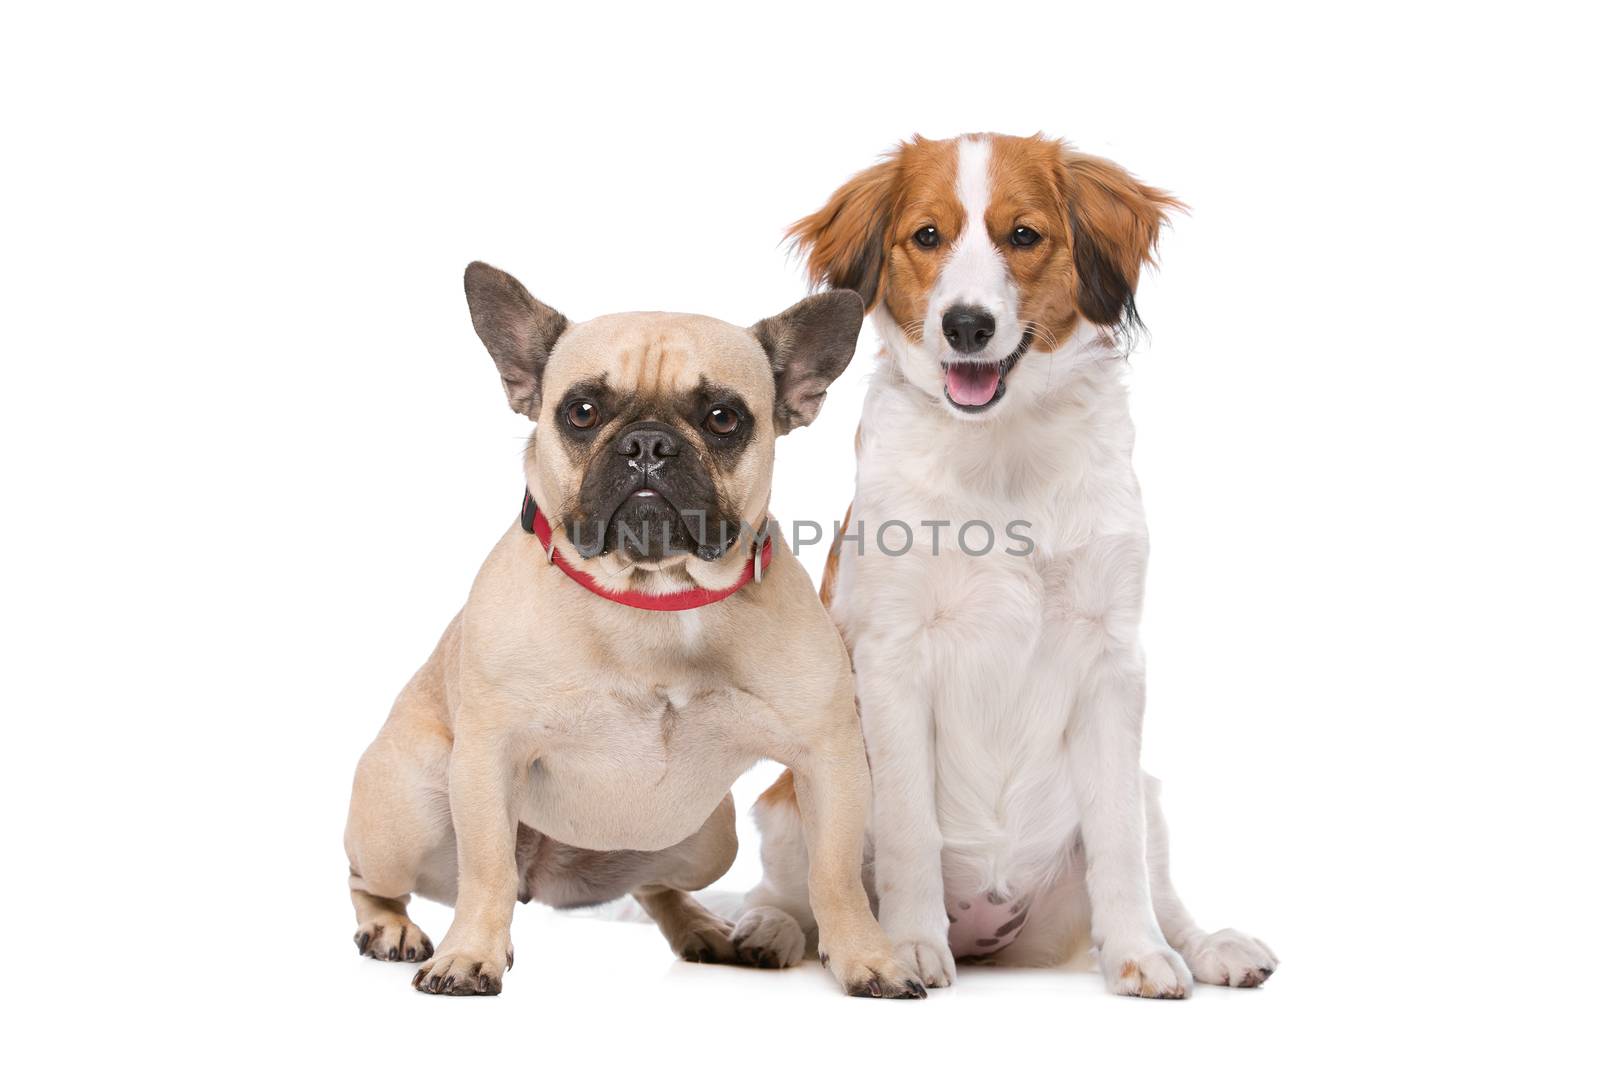 French Bulldog and a Kooiker Dog in front of a white background